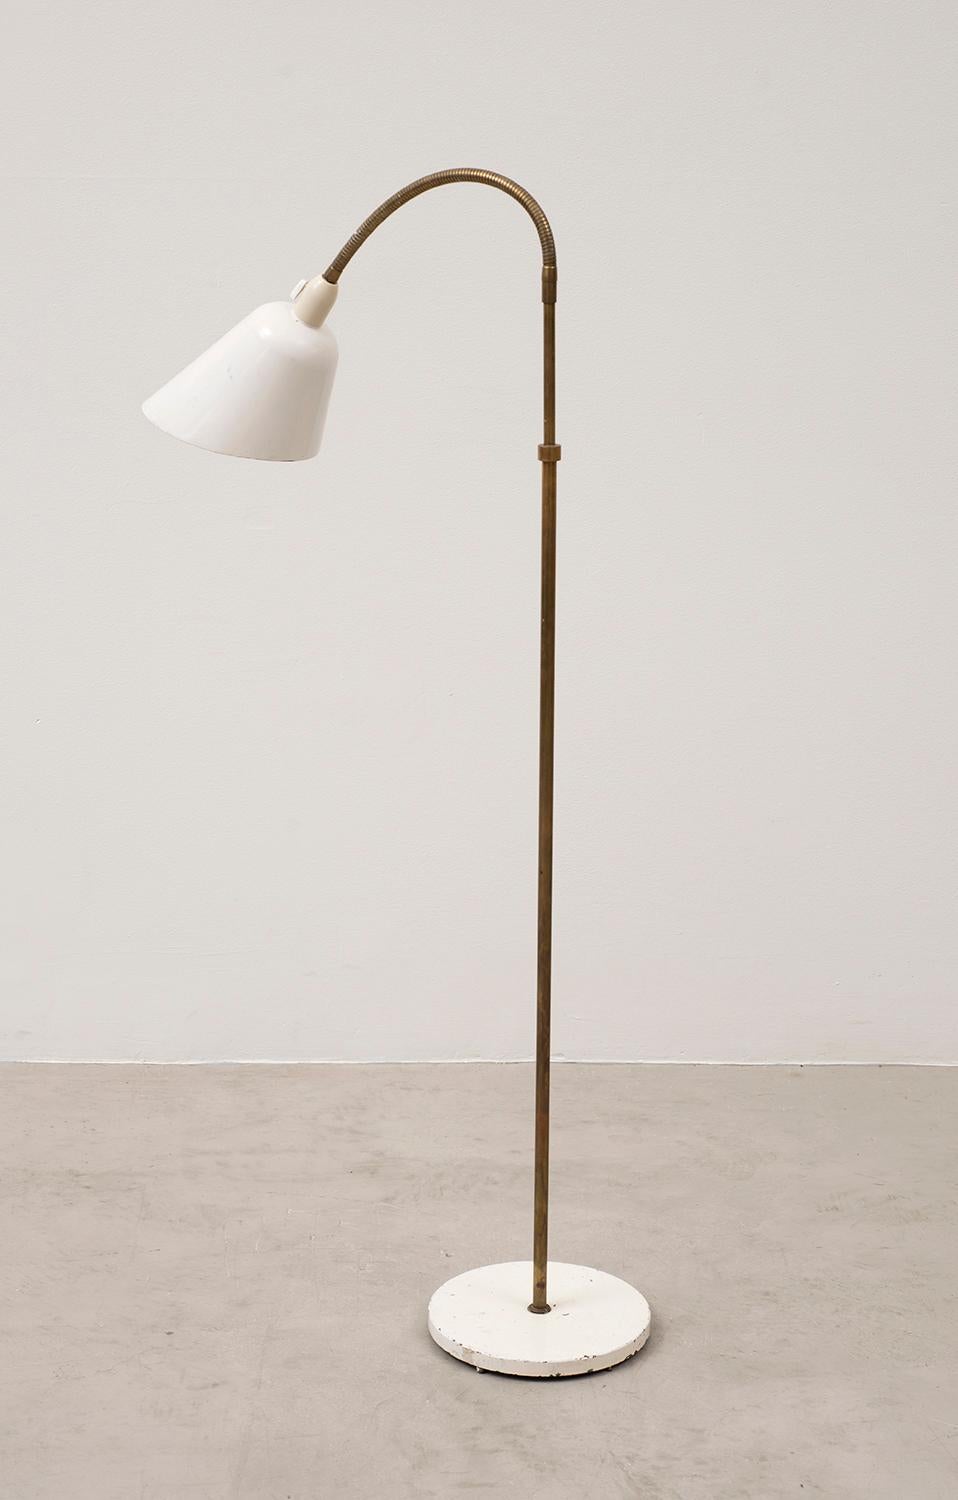 An early floor lamp by Arne Jacobsen in original condition, designed in 1929. Produced by Louis Poulsen in Denmark. Lovely patina on the painted shade and painted metal base. Shaft in original solid brass is adjustable and extends up to 5 feet in